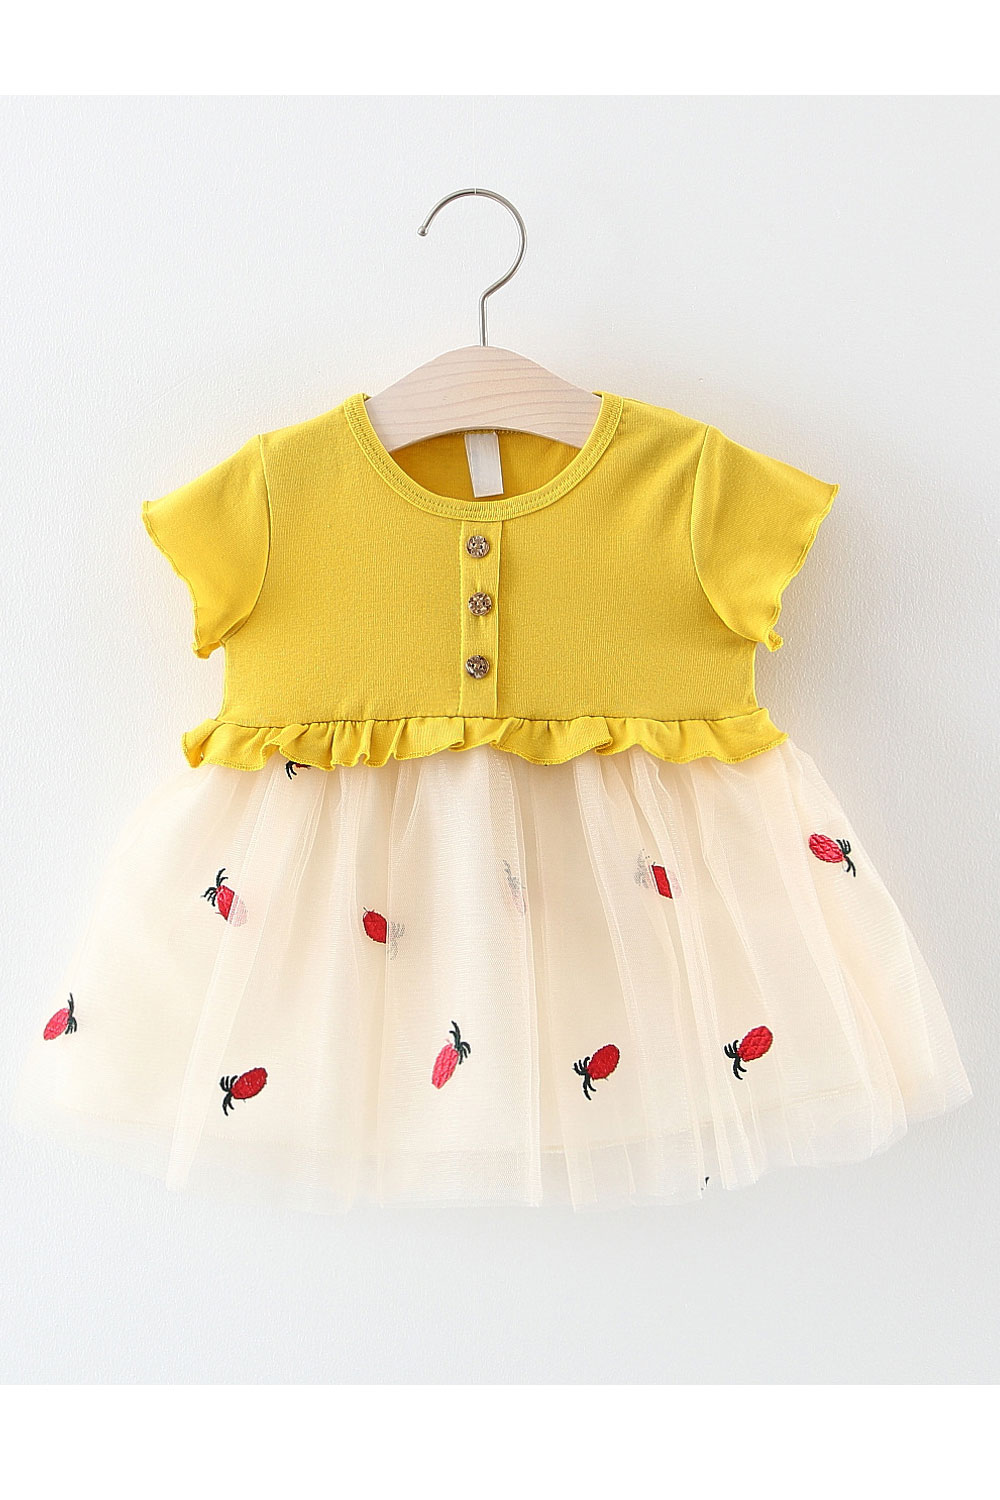 Selected Color is Yellow T short-sleeved pineapple gauze dress